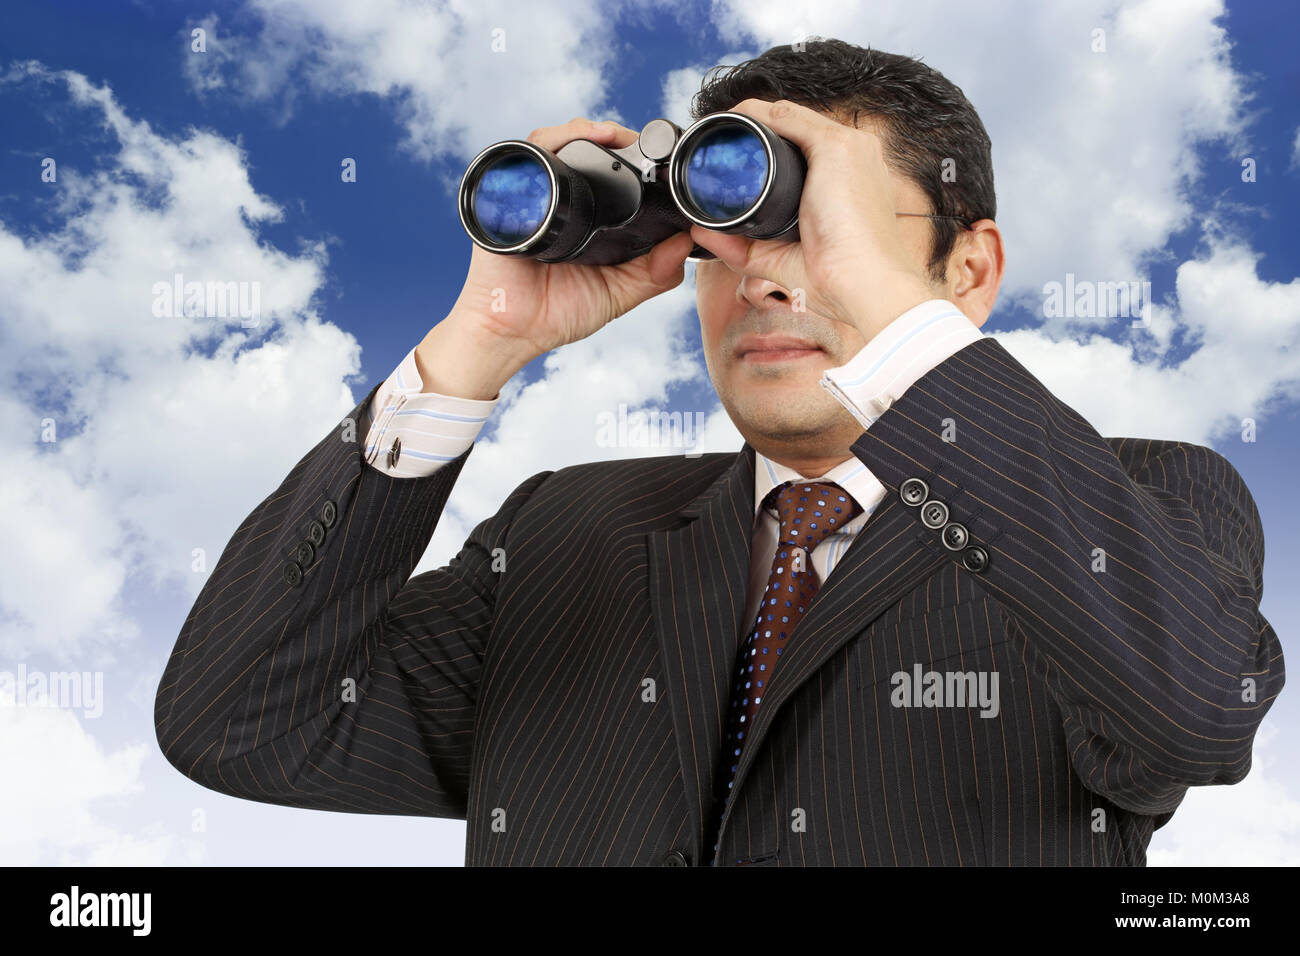 An Indian businessman in his late thirties looking through binoculars with a cloudy blue sky in the background. Stock Photo